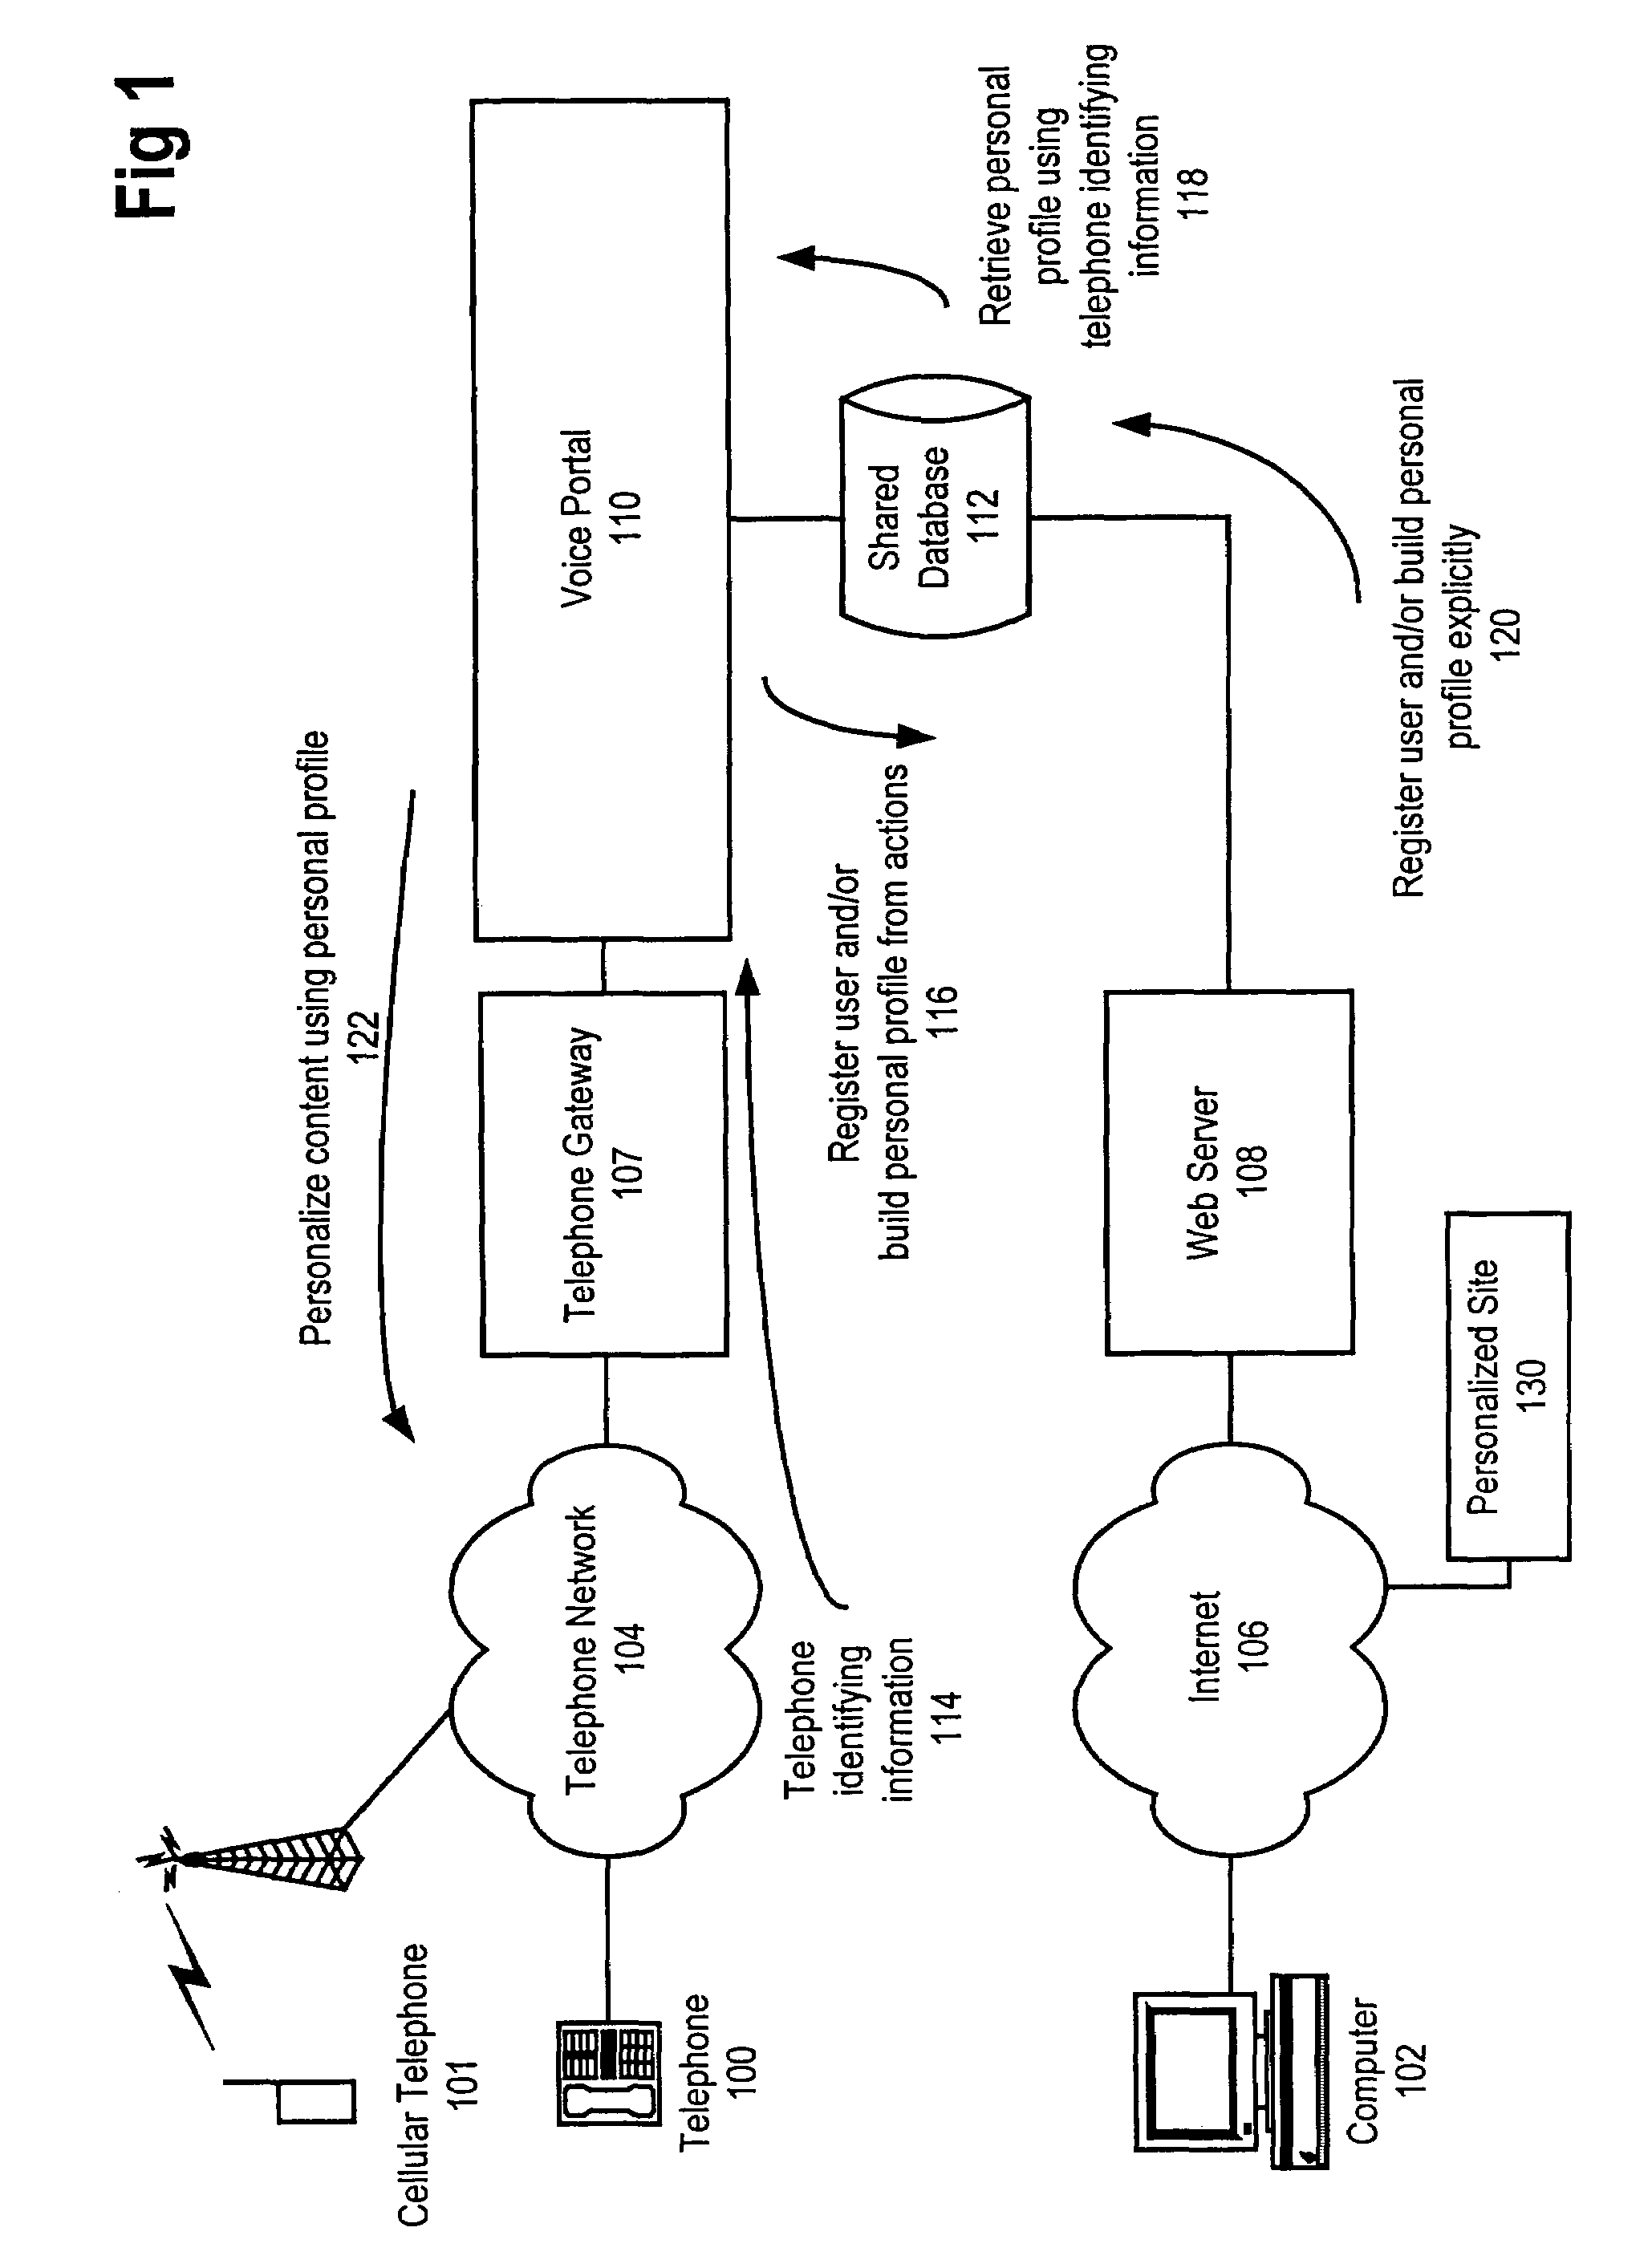 System for providing personalized content over a telephone interface to a user according to the corresponding personalization profile including the record of user actions or the record of user behavior